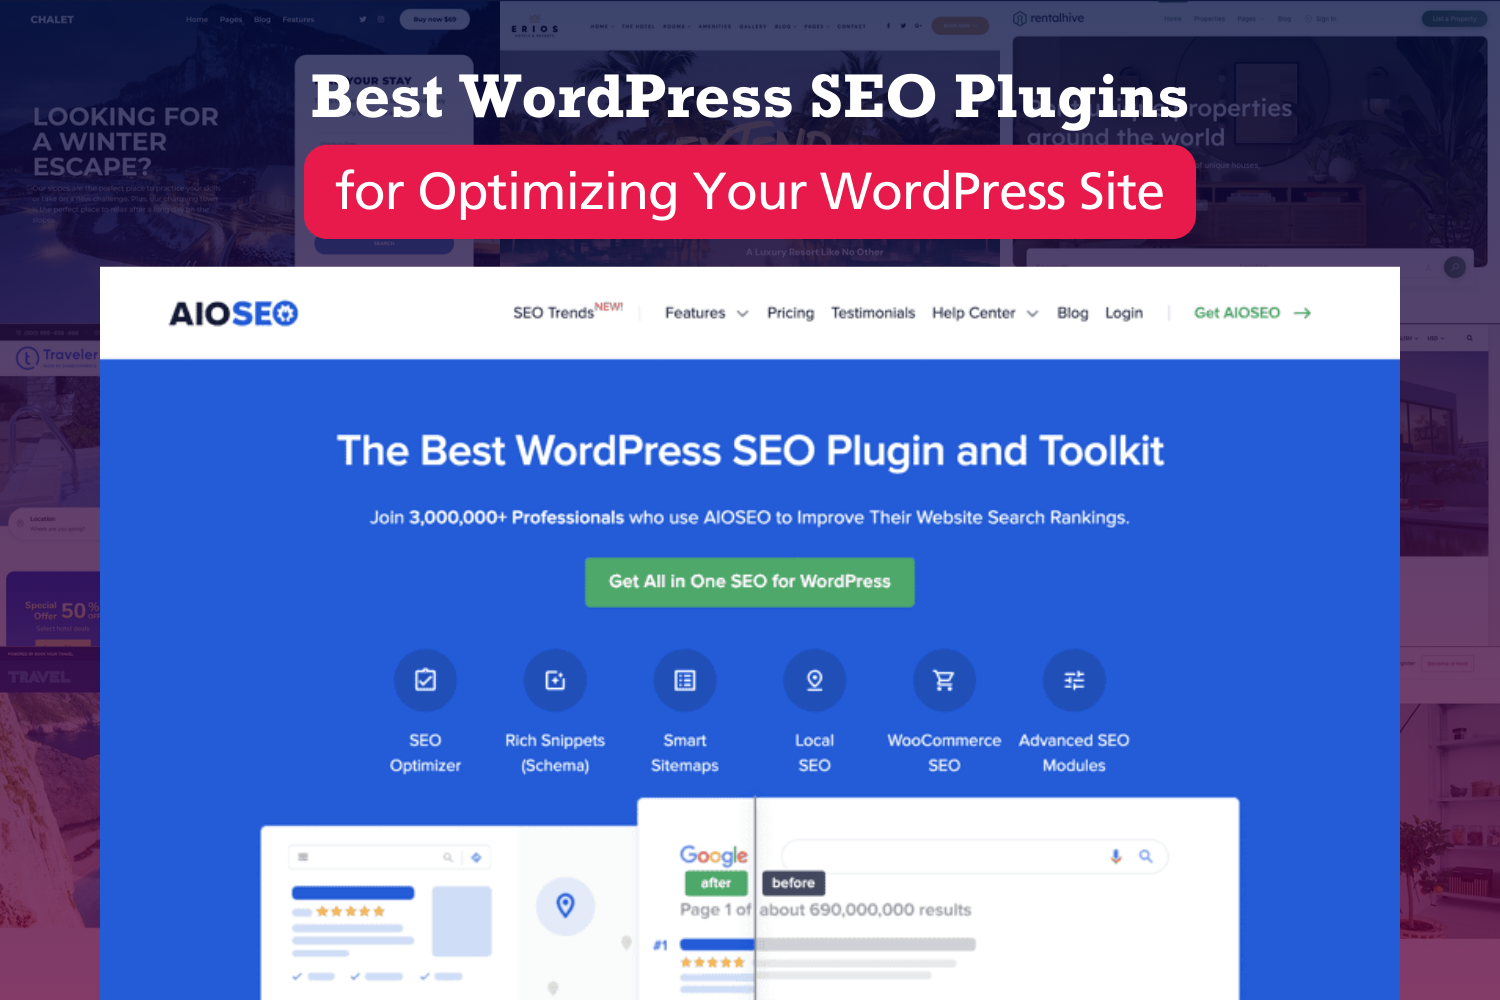 10 Best WordPress SEO Plugins for Optimizing Your Site